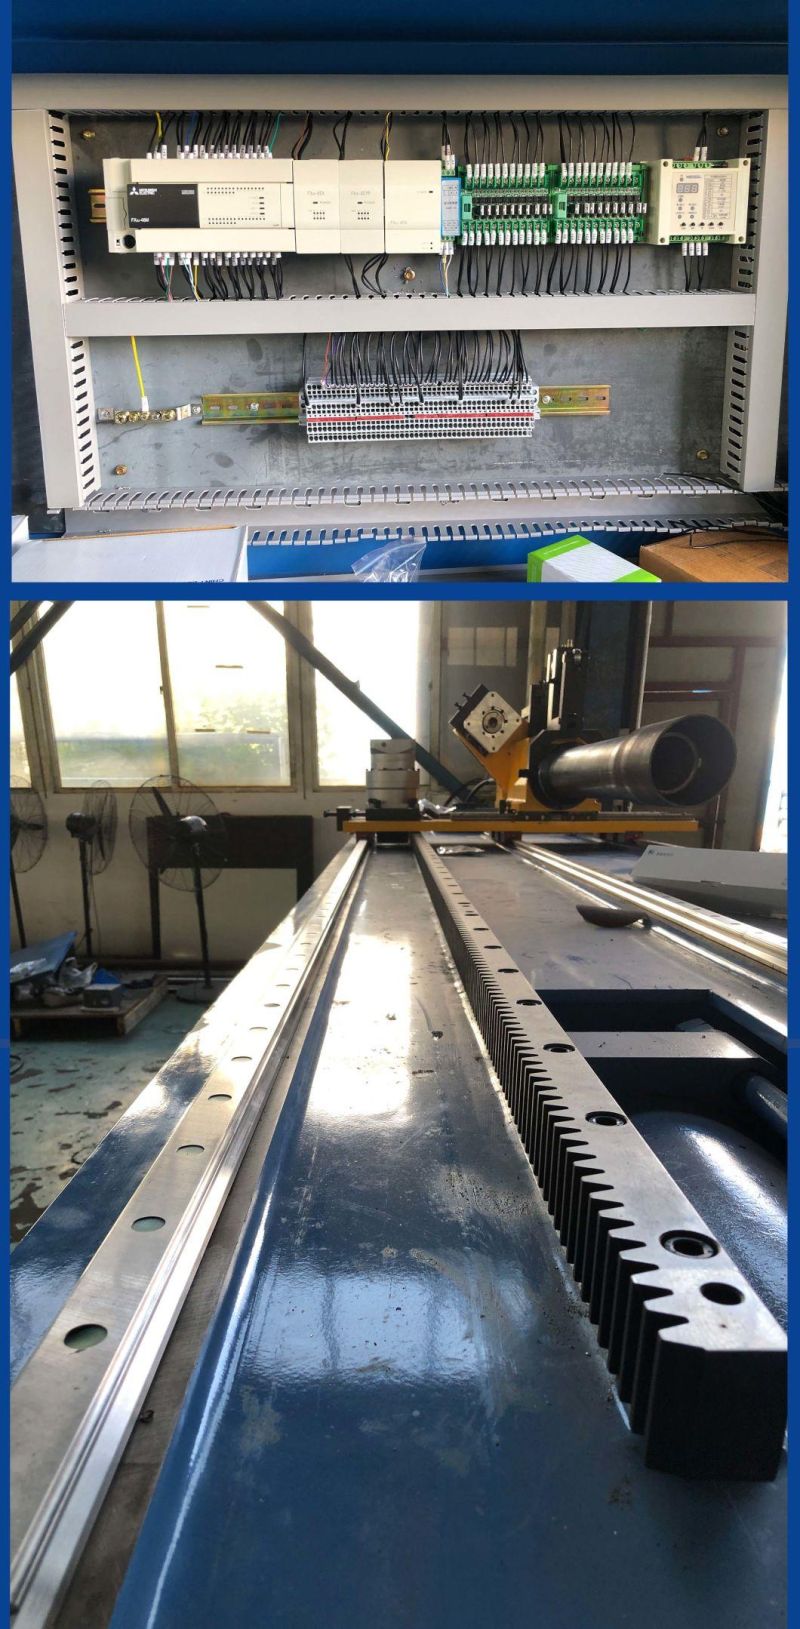 Selfsale High-Efficiency 114CNC Bender Machine for Bicycle